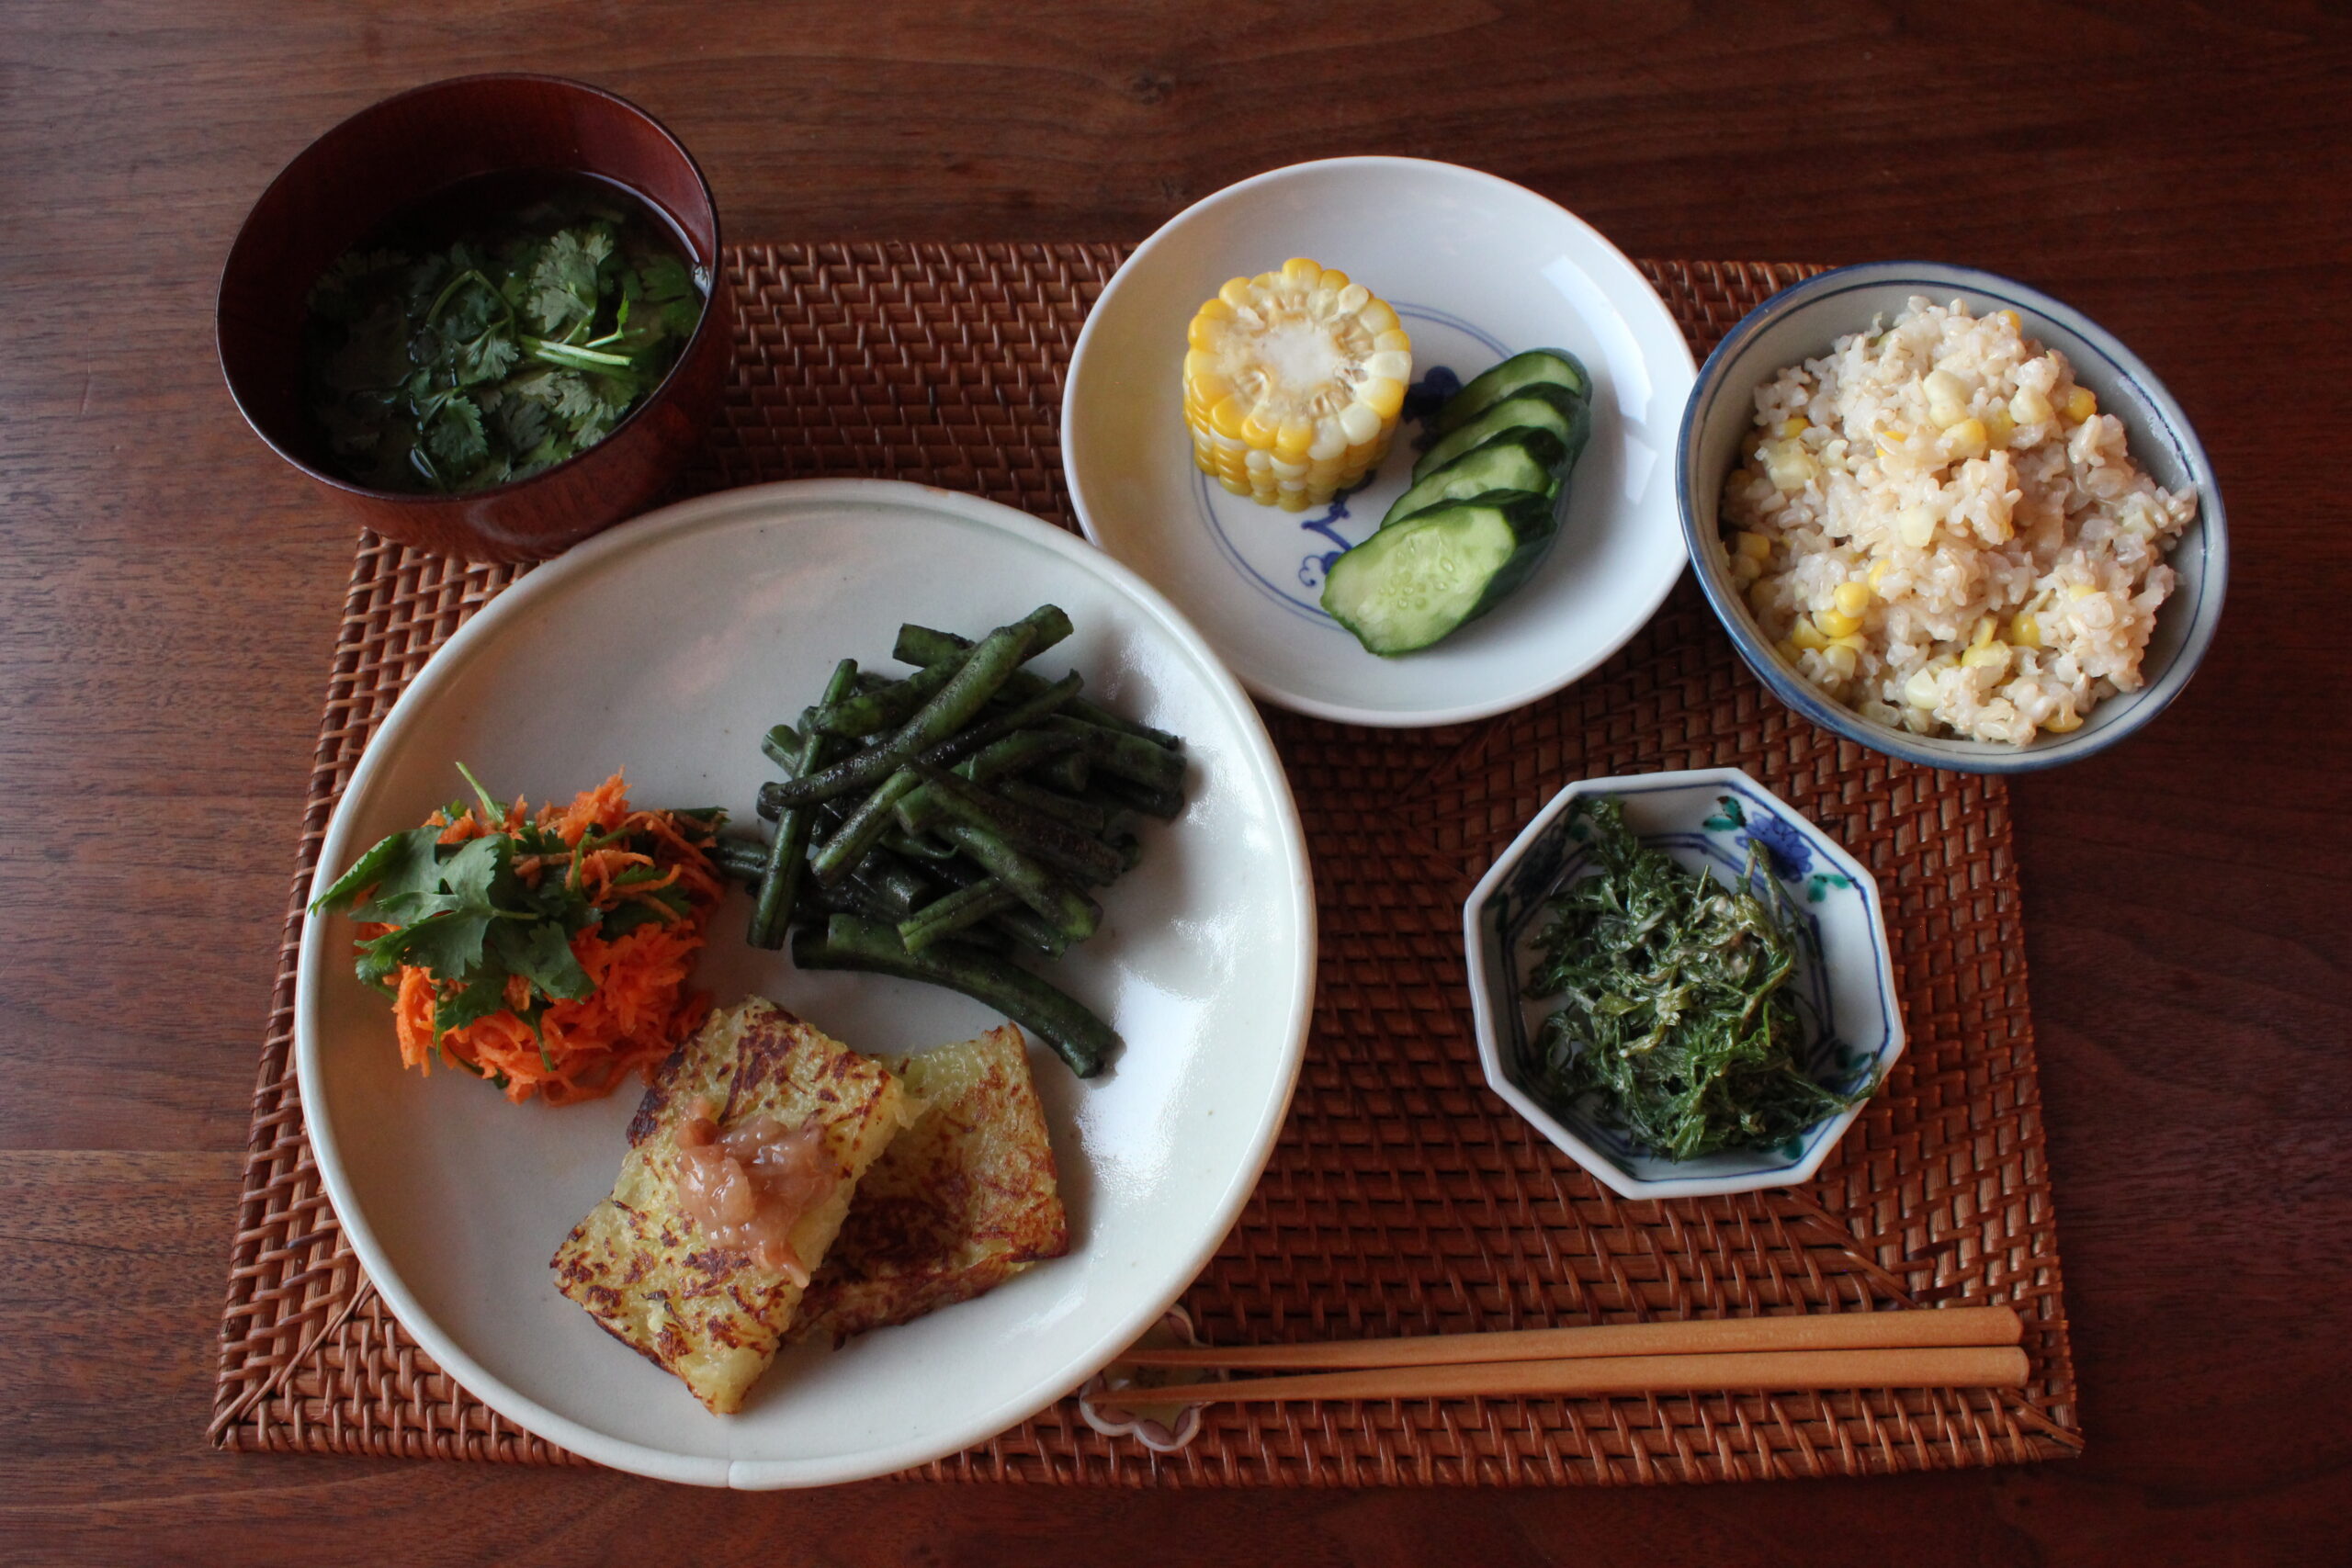 Japanese Summer Dinner with Corn Rice and Other Seasonal Delicious Dishes